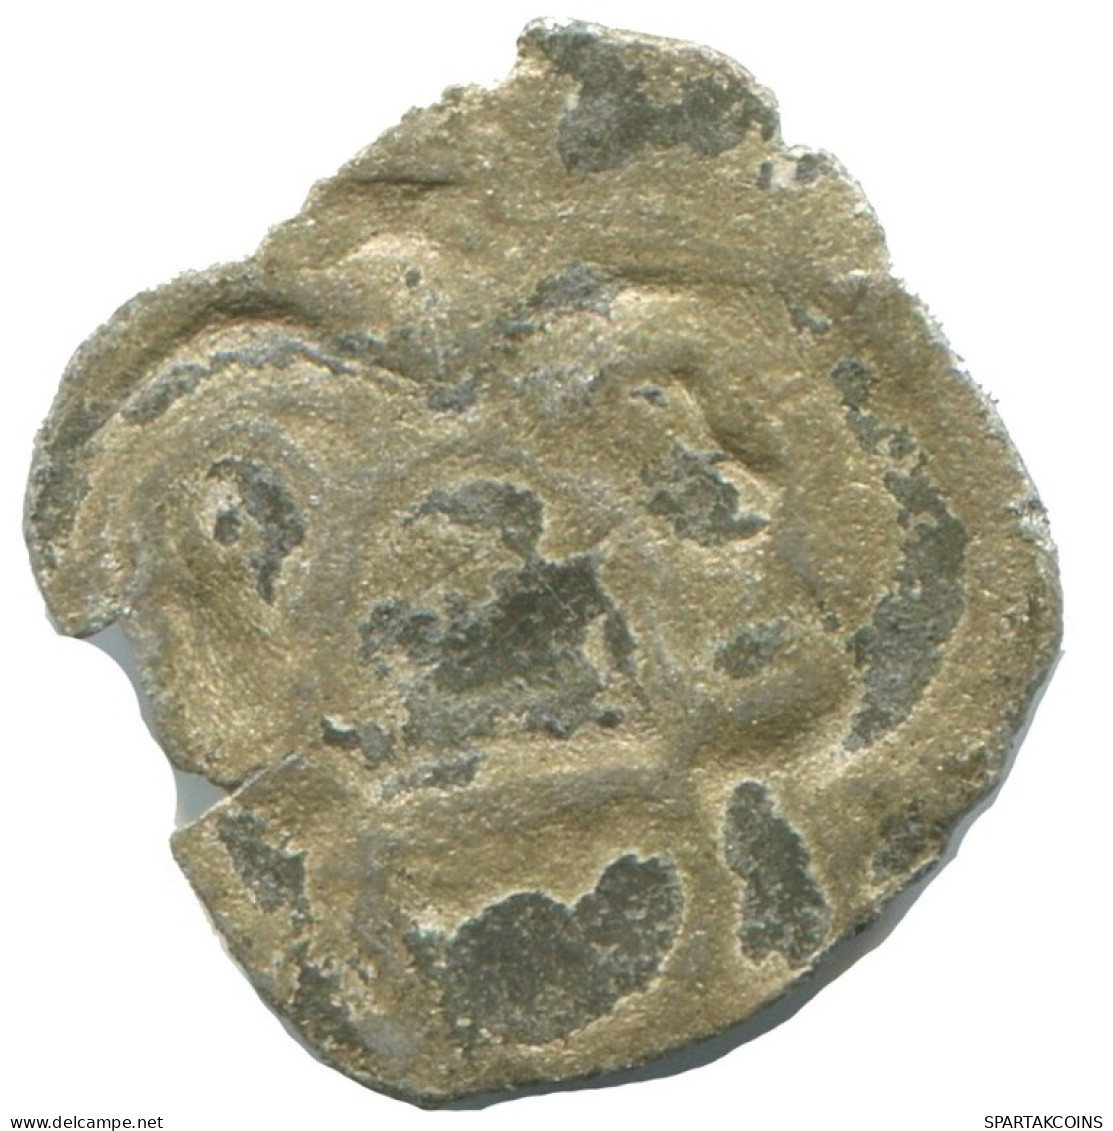 Authentic Original MEDIEVAL EUROPEAN Coin 0.3g/16mm #AC385.8.E.A - Other - Europe